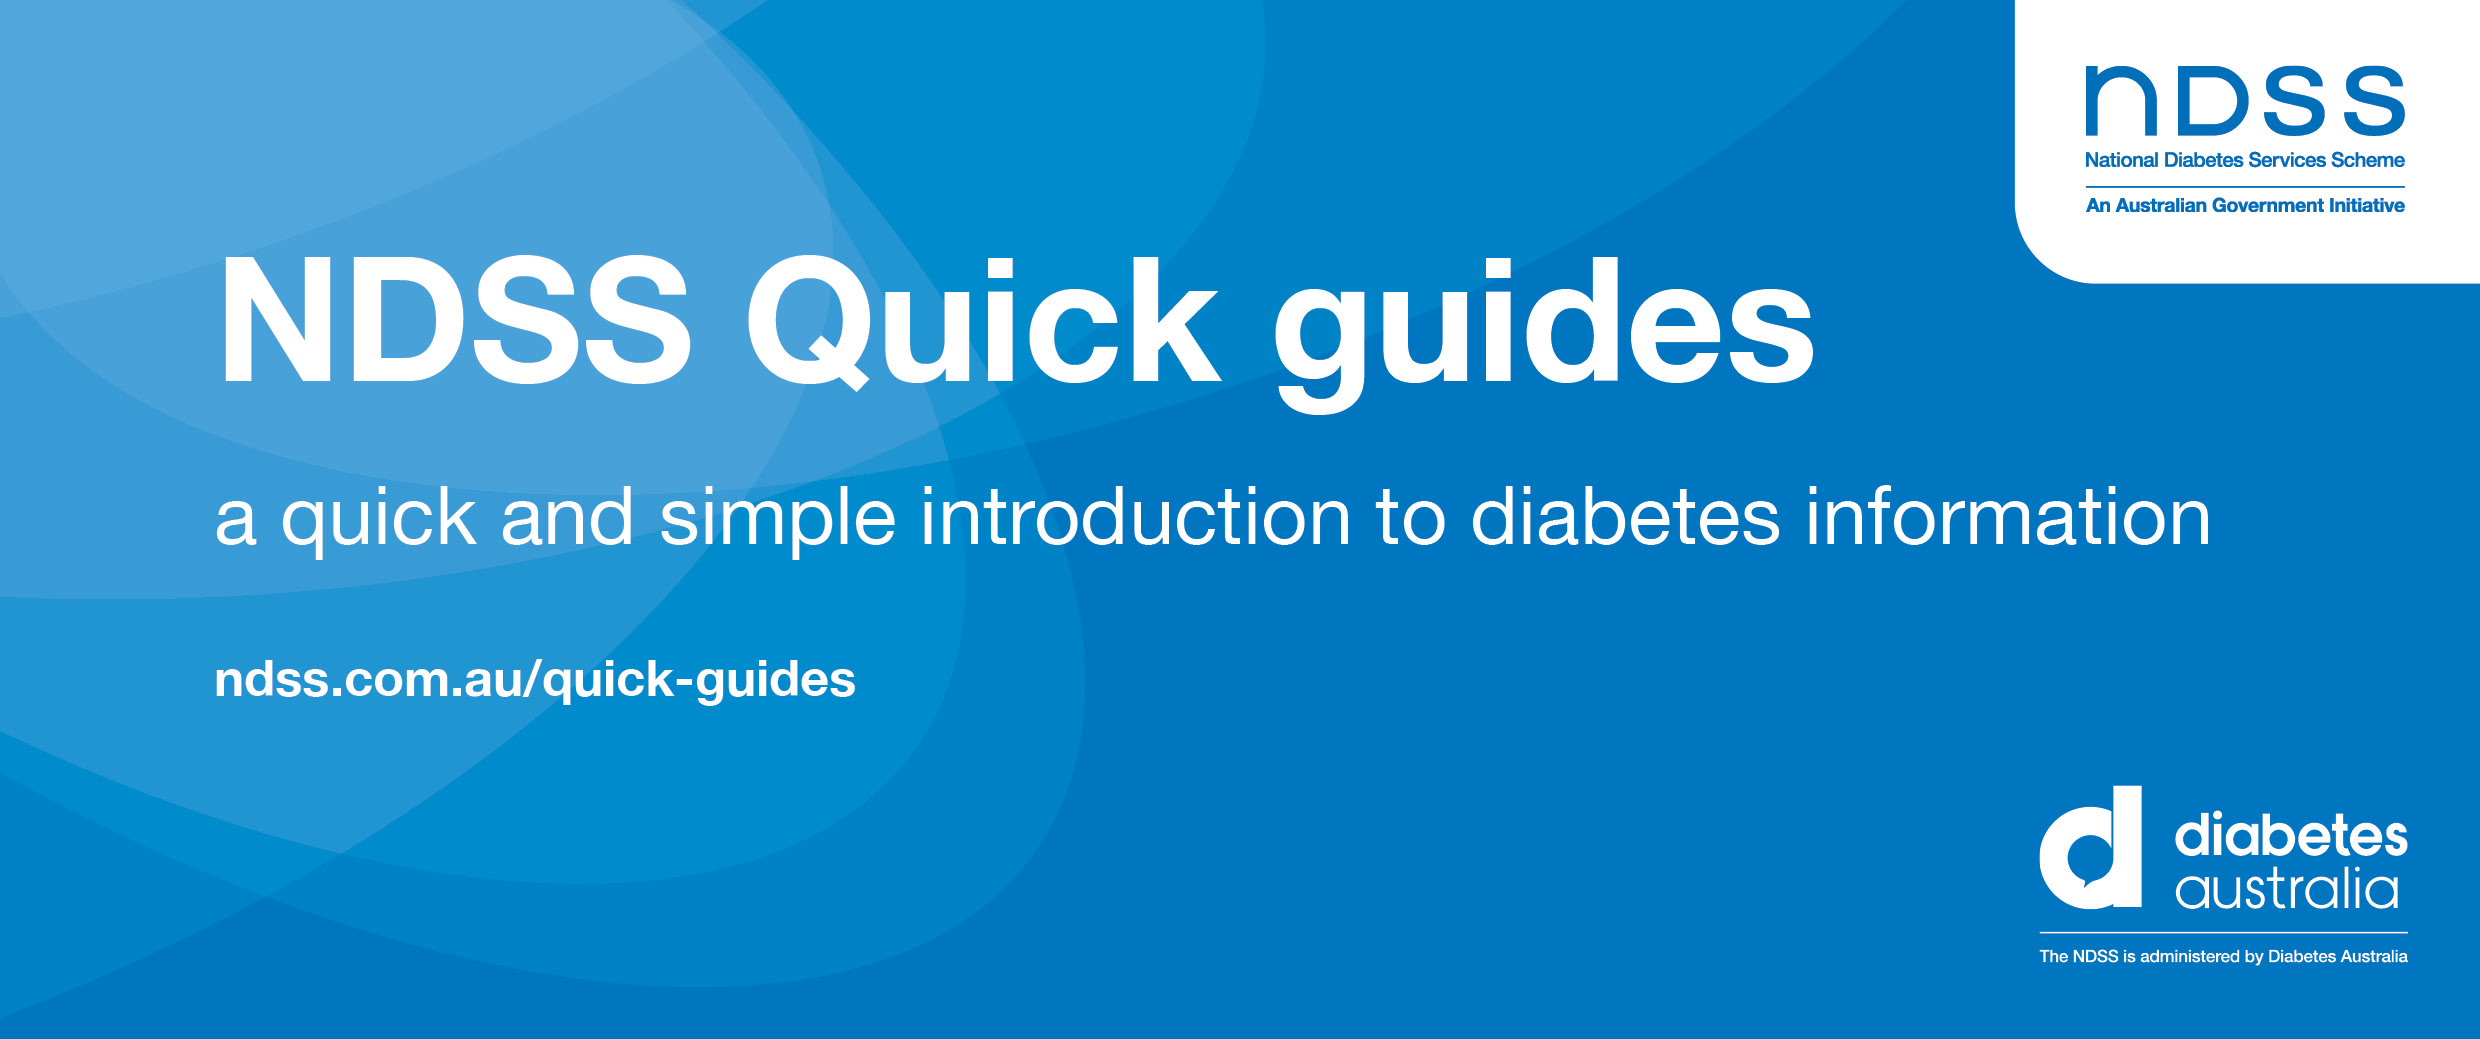 Diabetes quick guides: The National Diabetes Services Scheme (NDSS) has released a new set of resources; the diabetes quick guides.